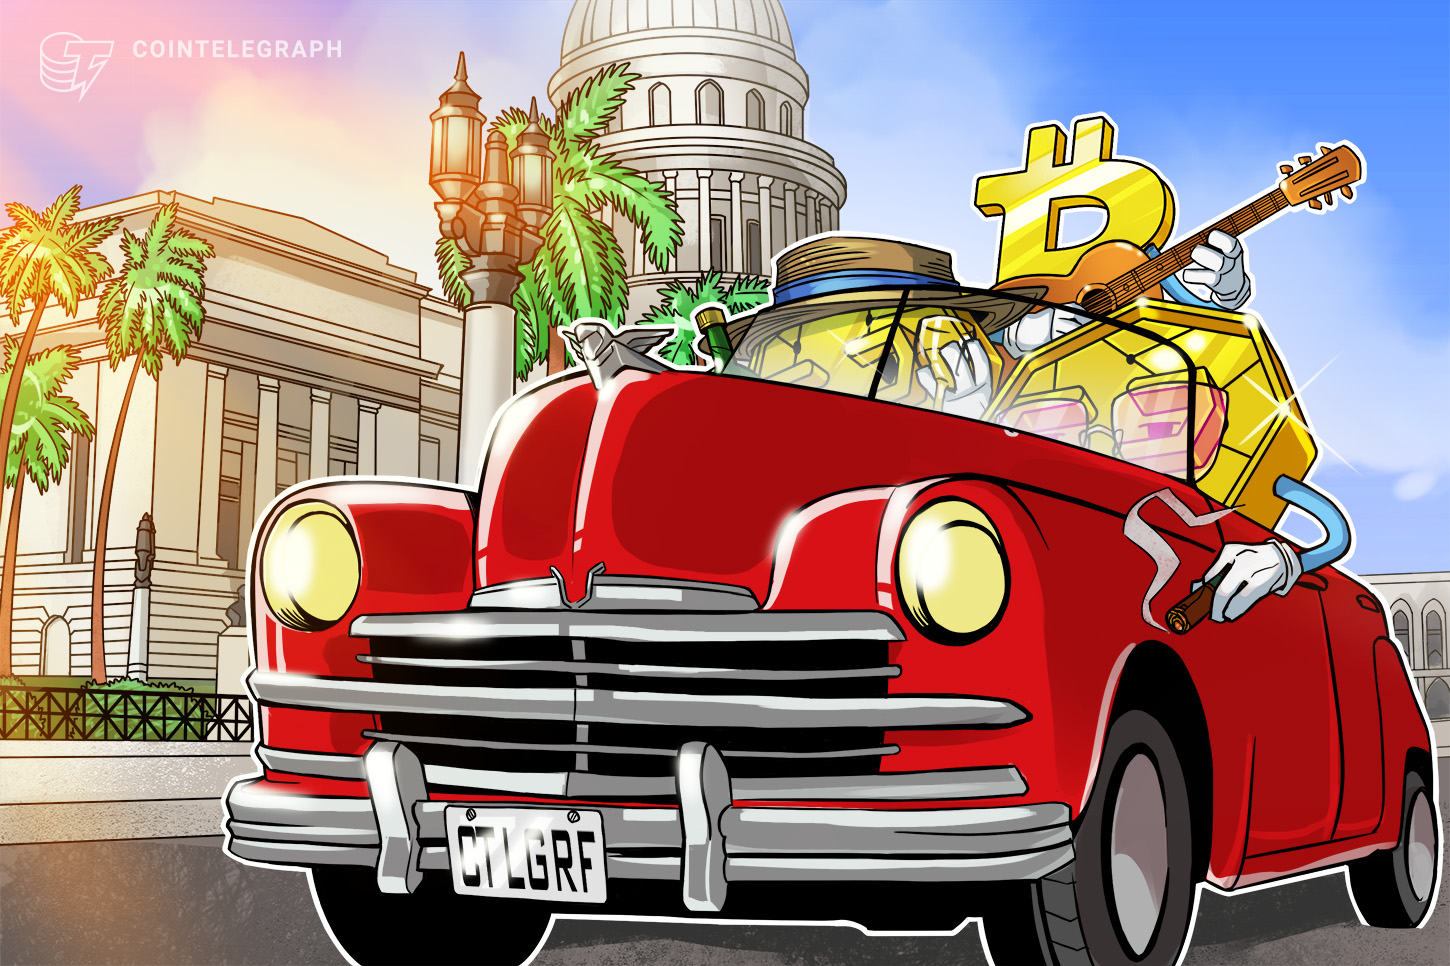 Cuban freedom fighters launch underground Bitcoin remittance community